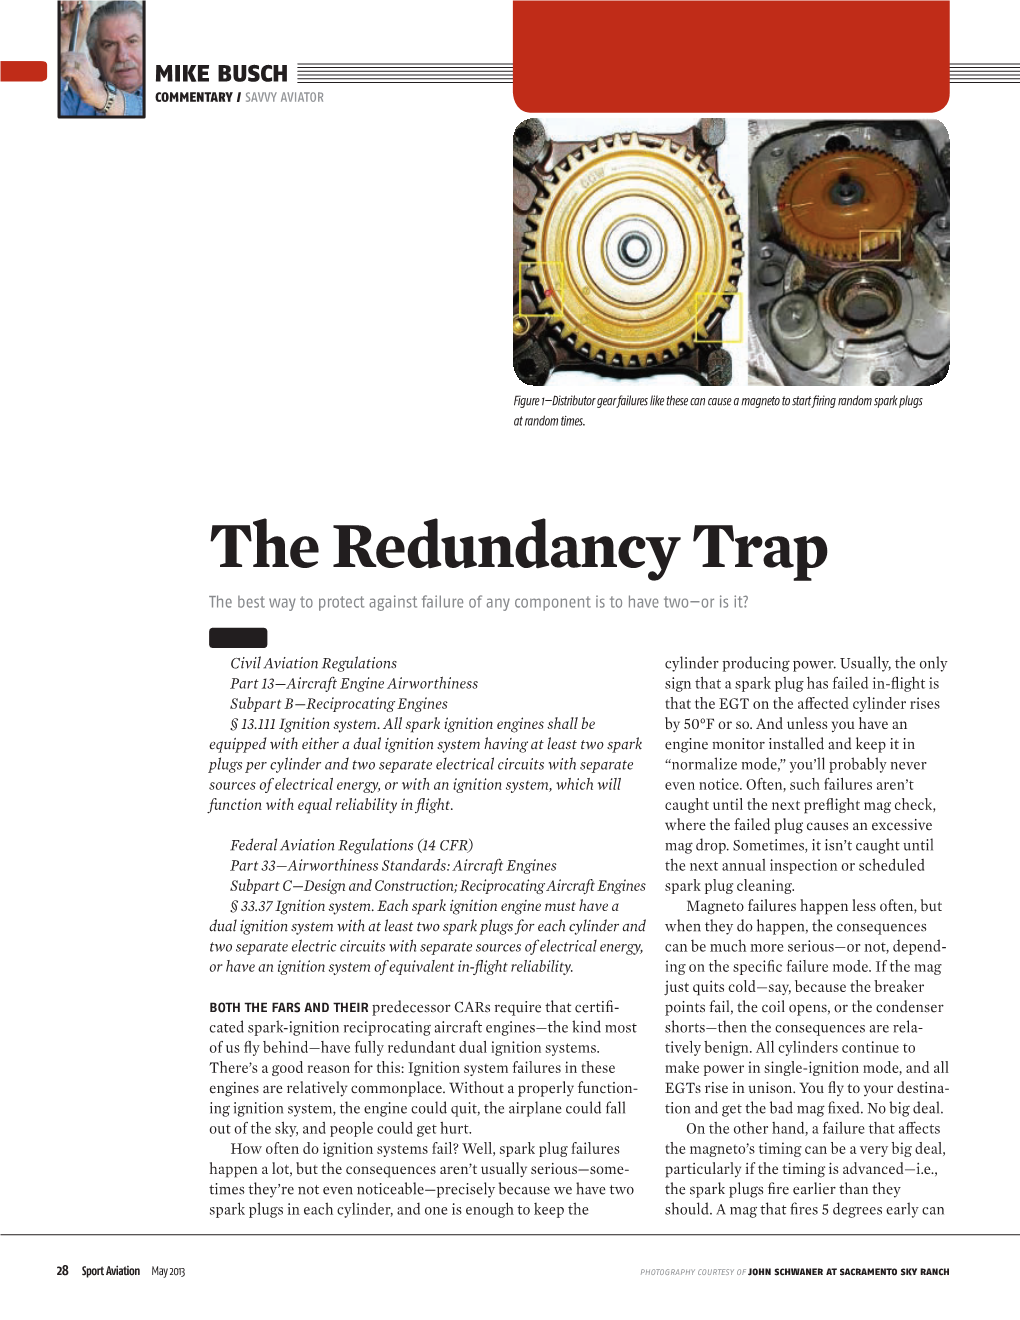 The Redundancy Trap the Best Way to Protect Against Failure of Any Component Is to Have Two—Or Is It?